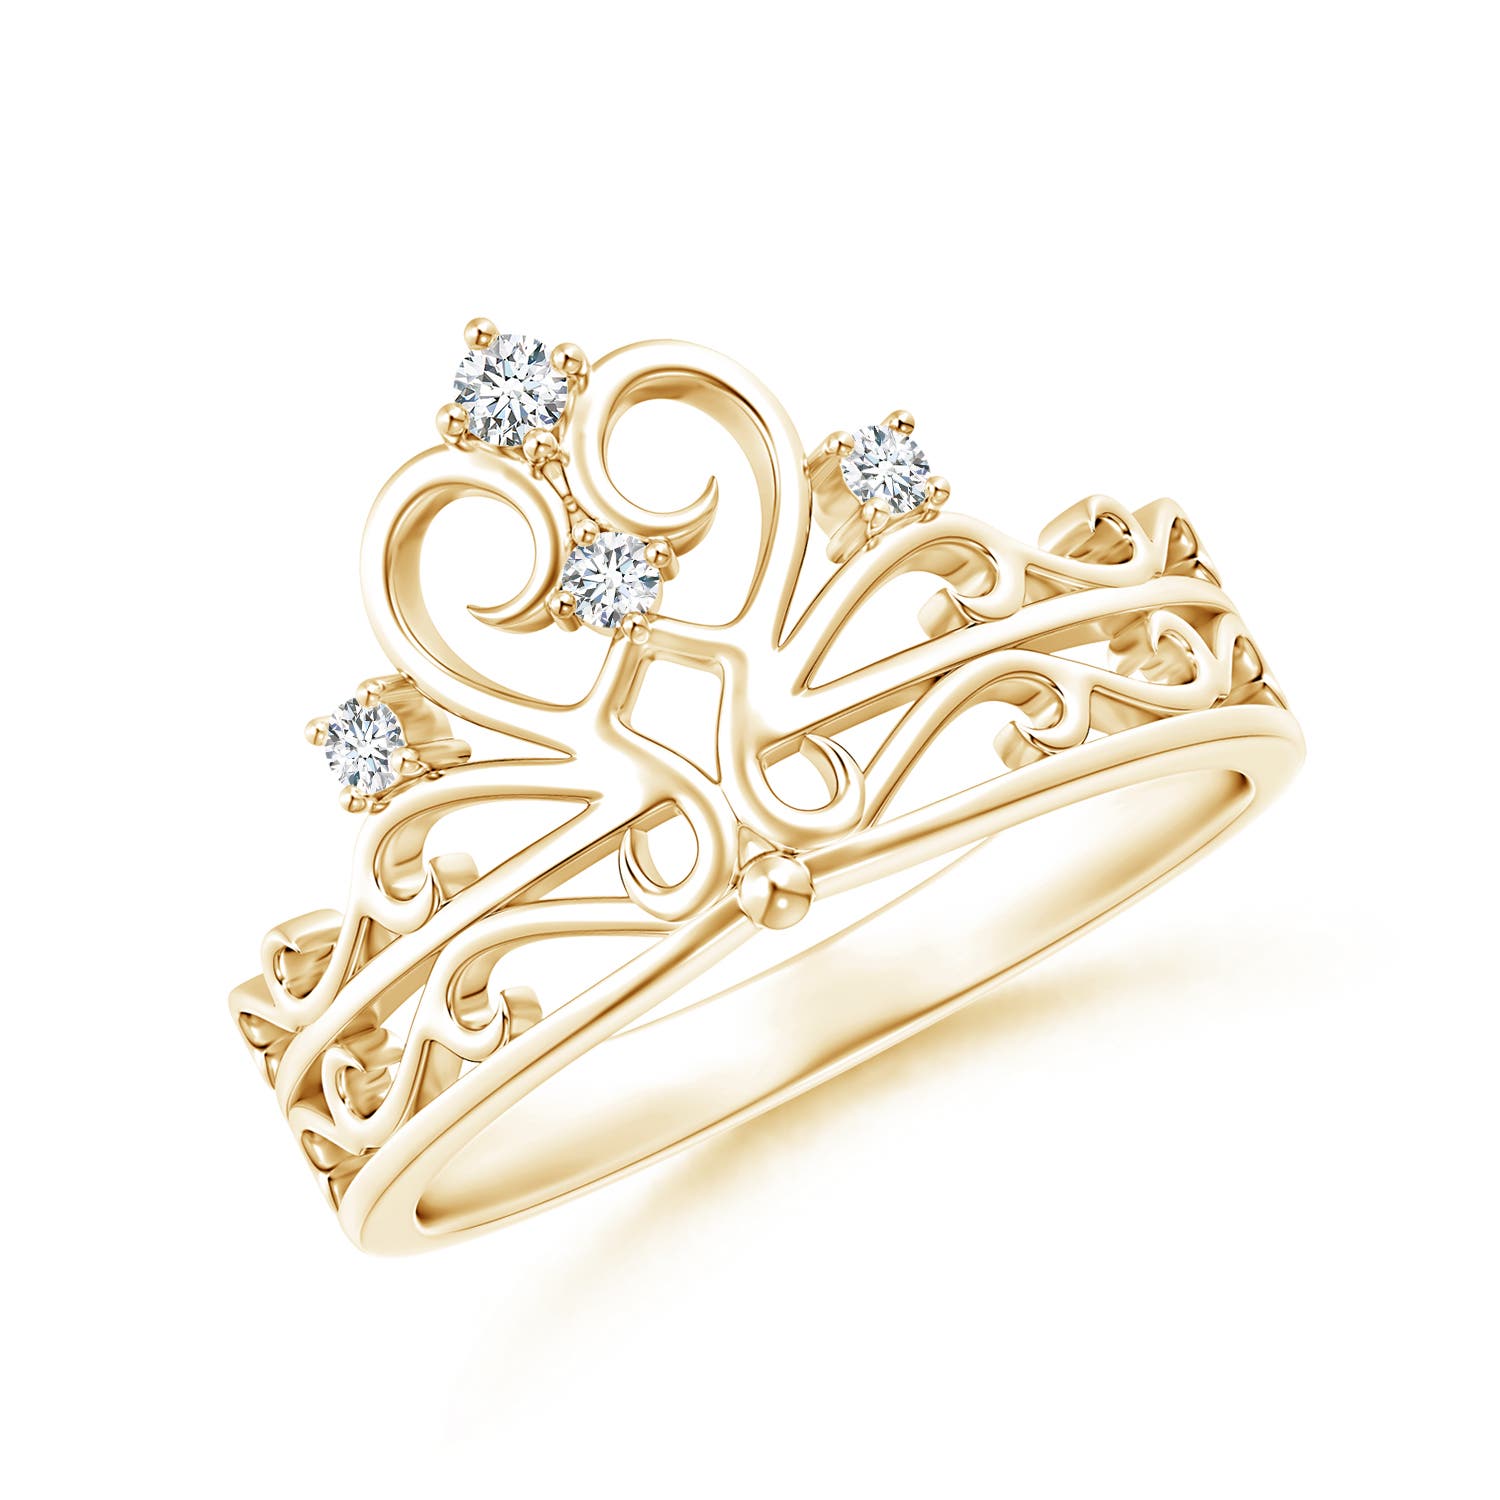 14K YELLOW GOLD PAVE HEART CROWN RING | Patty Q's Jewelry Inc